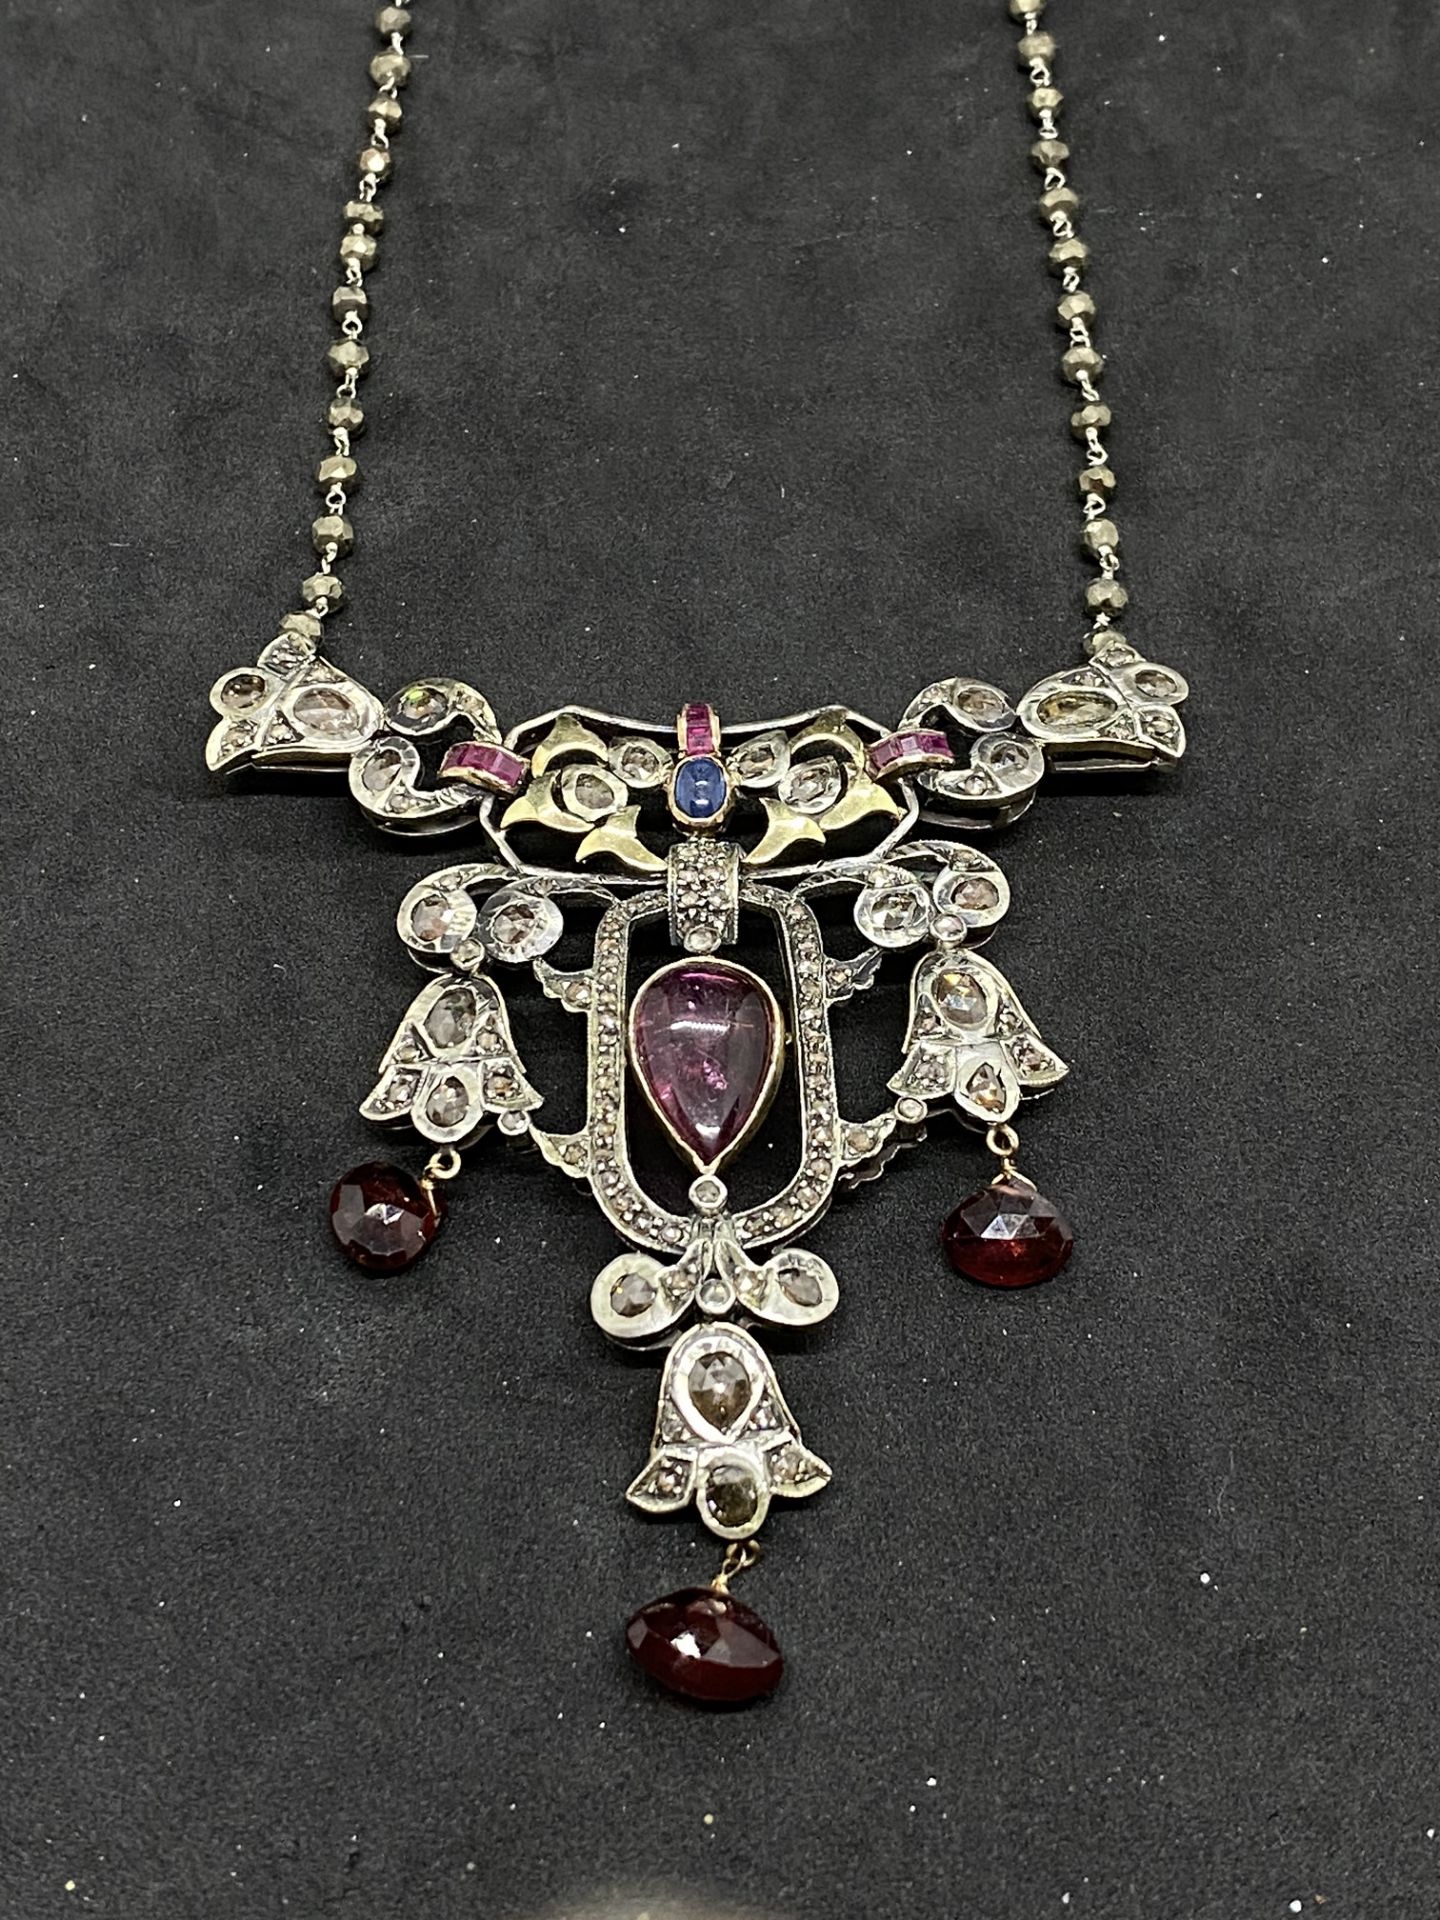 RUBY, ROSE DIAMOND, GARNET & SAPPHIRE SET NECKLACE IN YELLOW & WHITE METAL TESTED AS SILVER & GOLD - Image 11 of 12